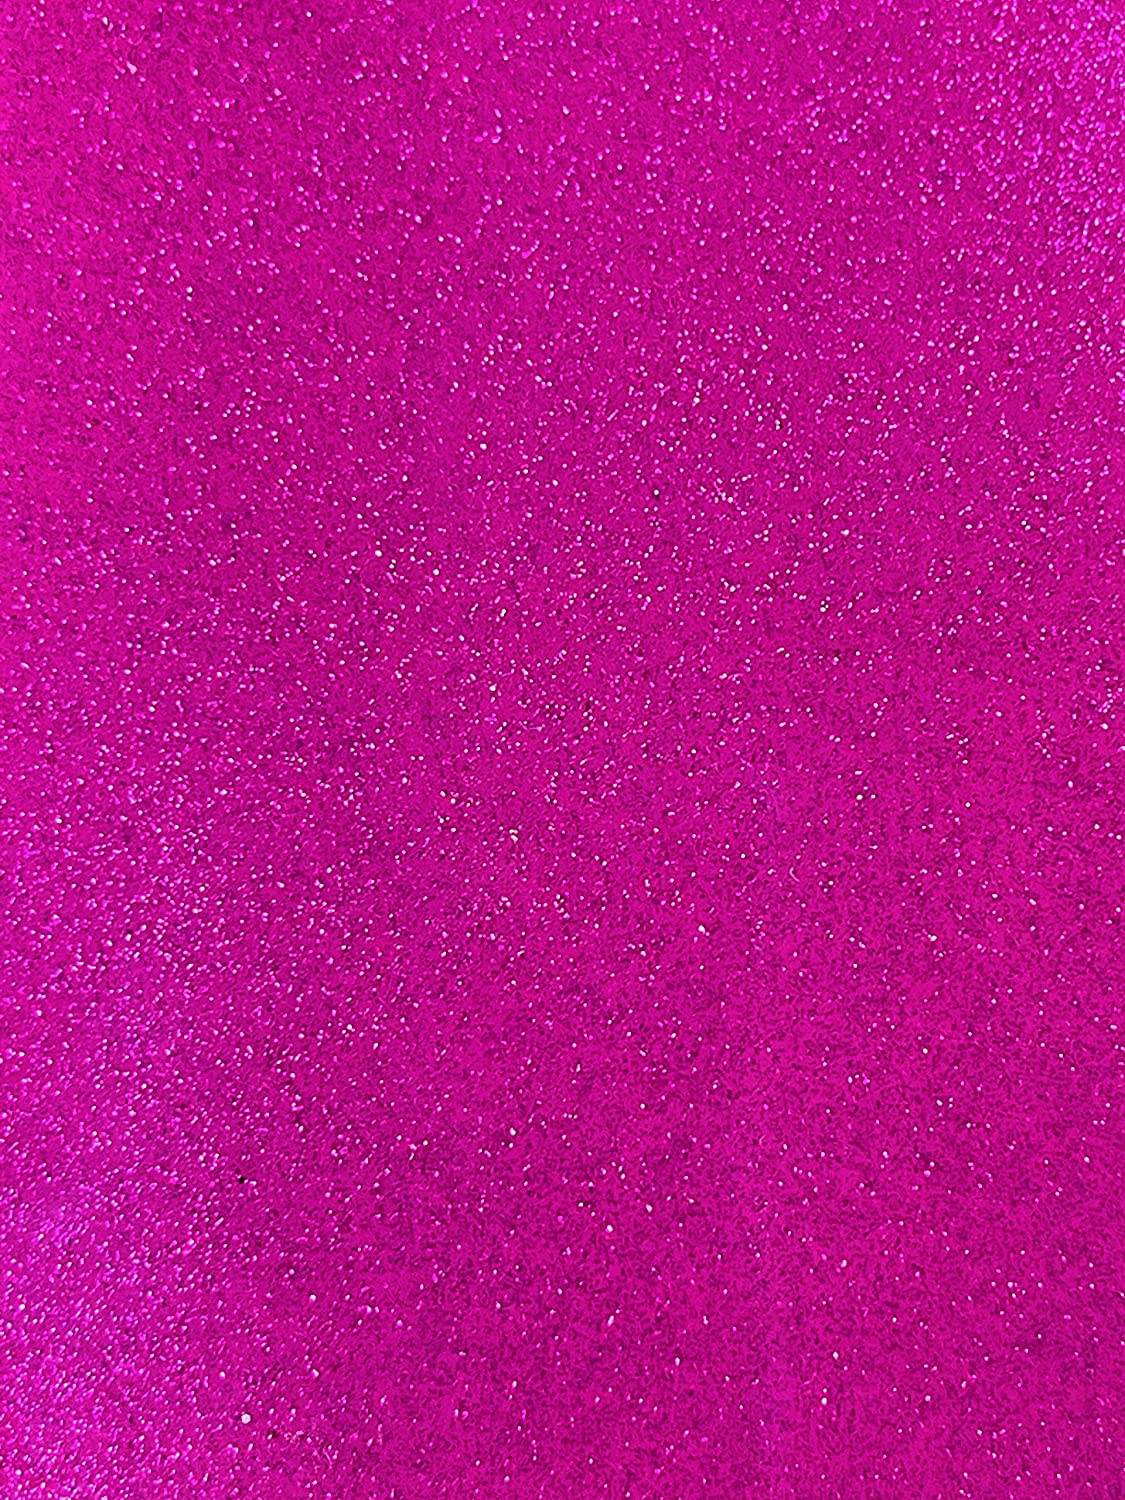 53/54" Wide Shiny Sparkle Glitter Vinyl, Faux Leather PVC-Upholstery Craft Fabric by The Yard (Fuchsia, 1 Yard)